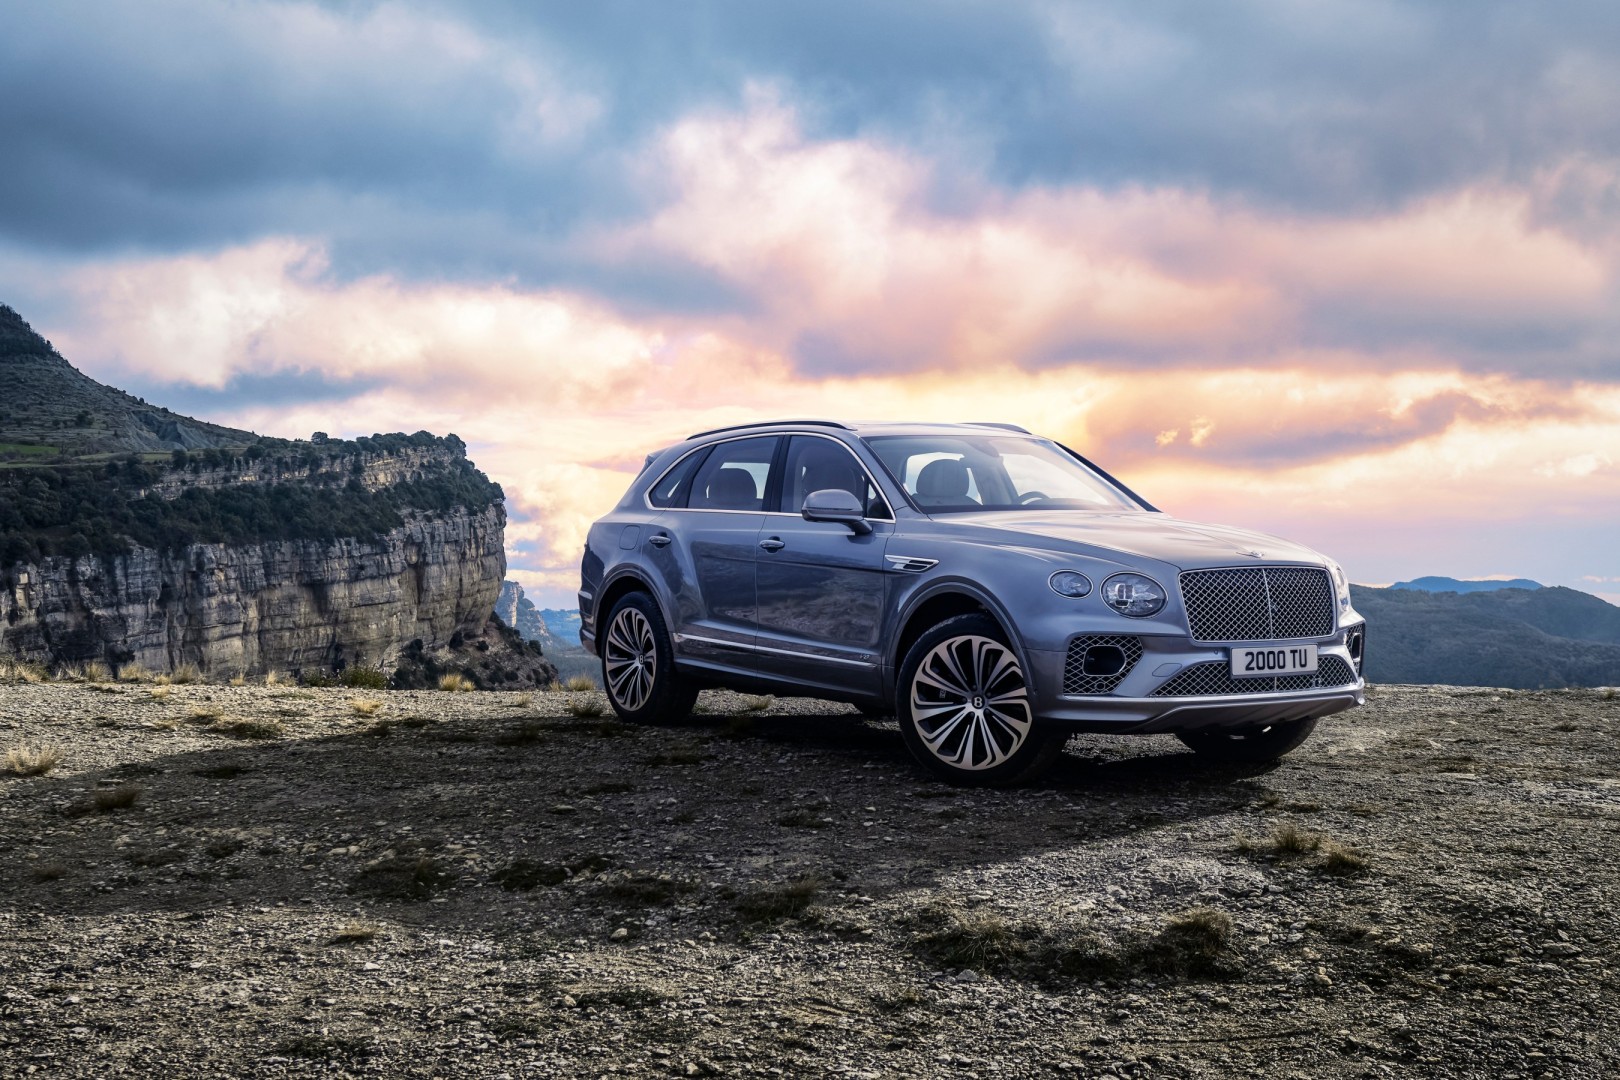 Bentley Raises the Bar Again With Sector-Defining Luxury SUV